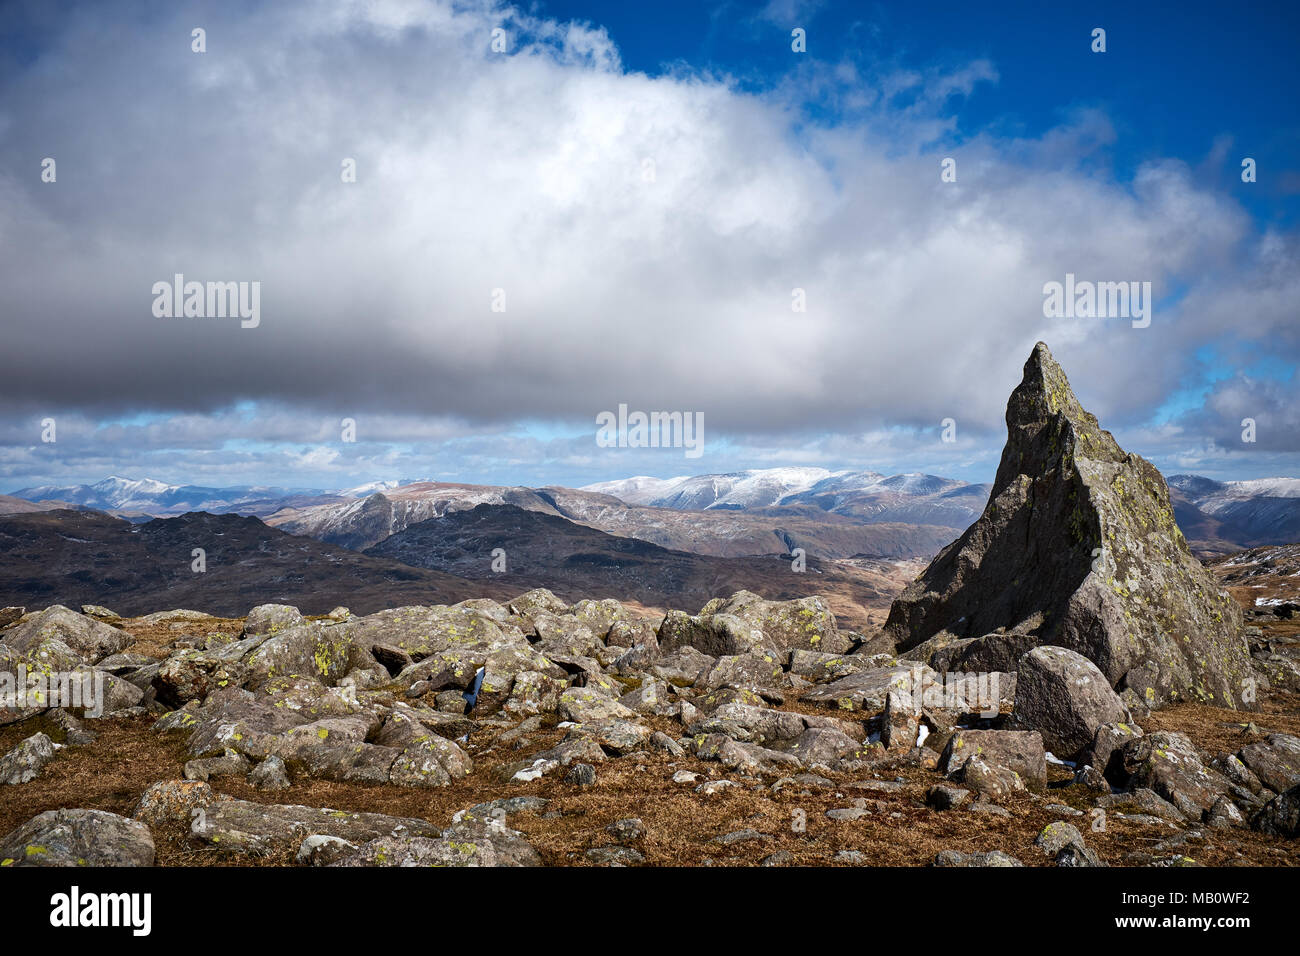 Cumbria / UK - April 5th 2018: The English Lake District where Skiddaw and Helvellyn can be seen from Matterhorn rock on Grey Friar Stock Photo